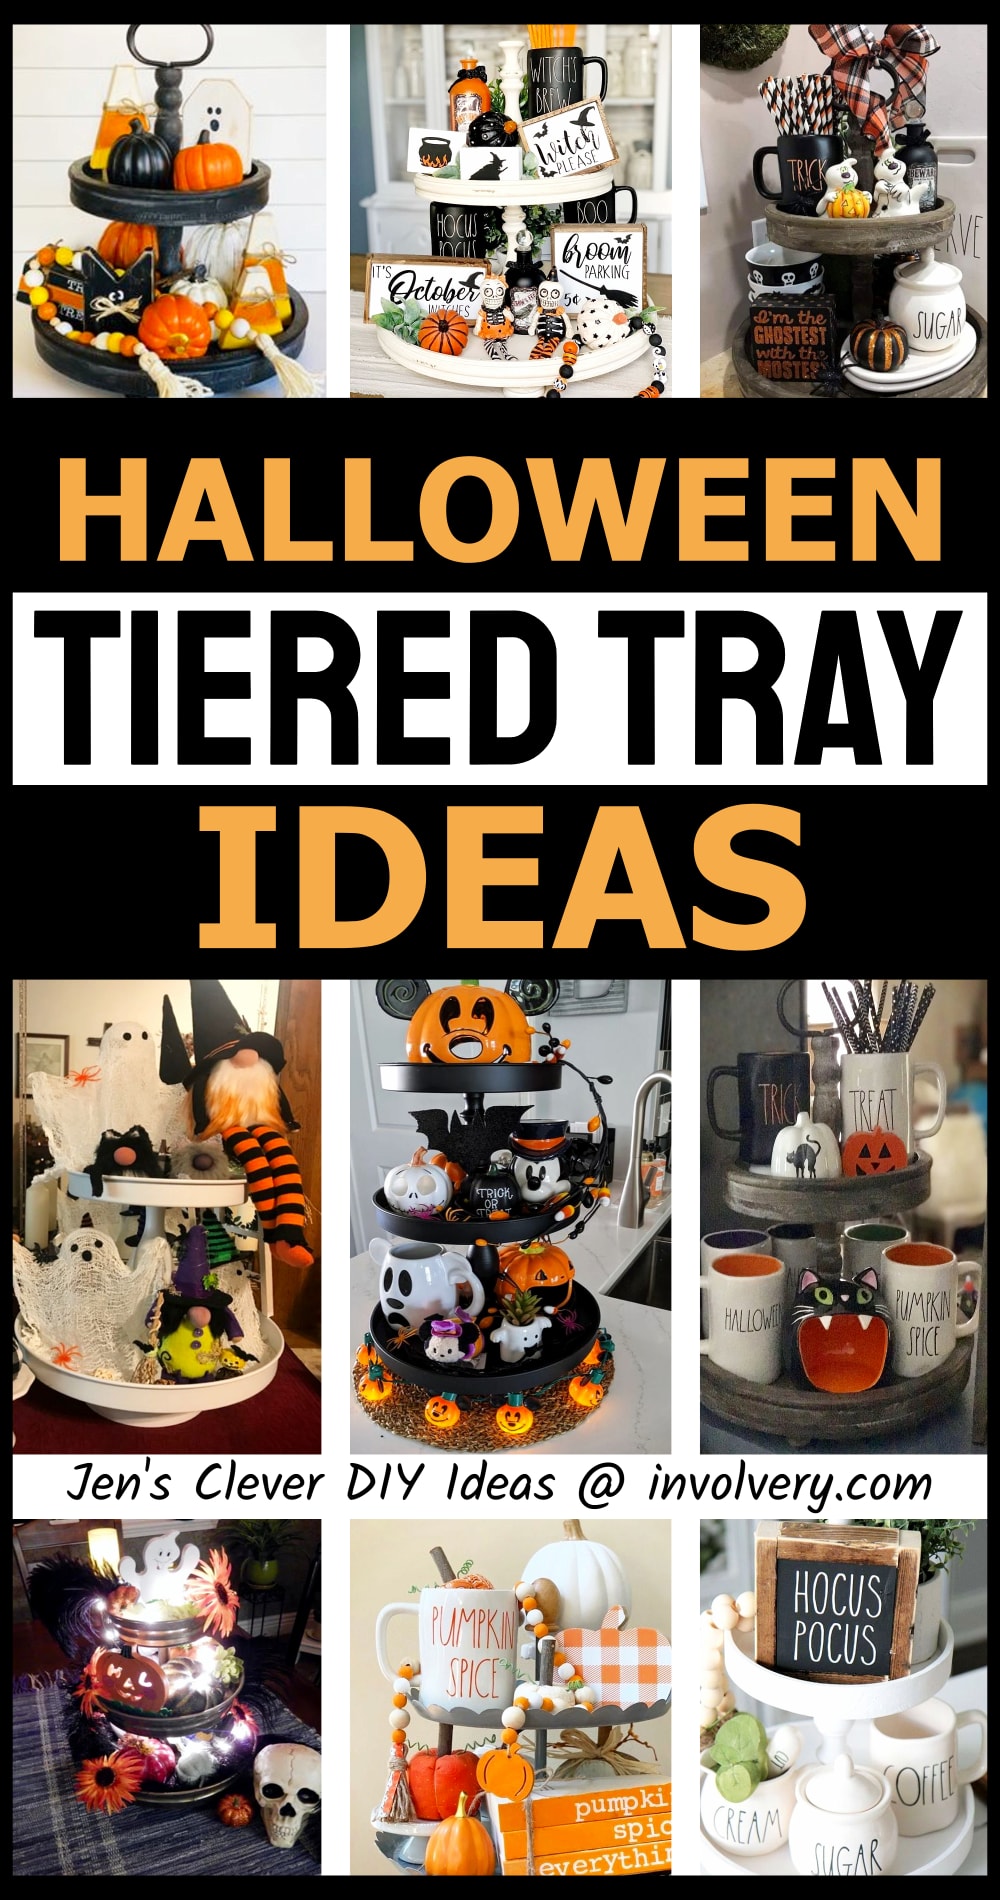 Halloween tiered tray ideas - wooden tray decorations and table tray decor for Halloween